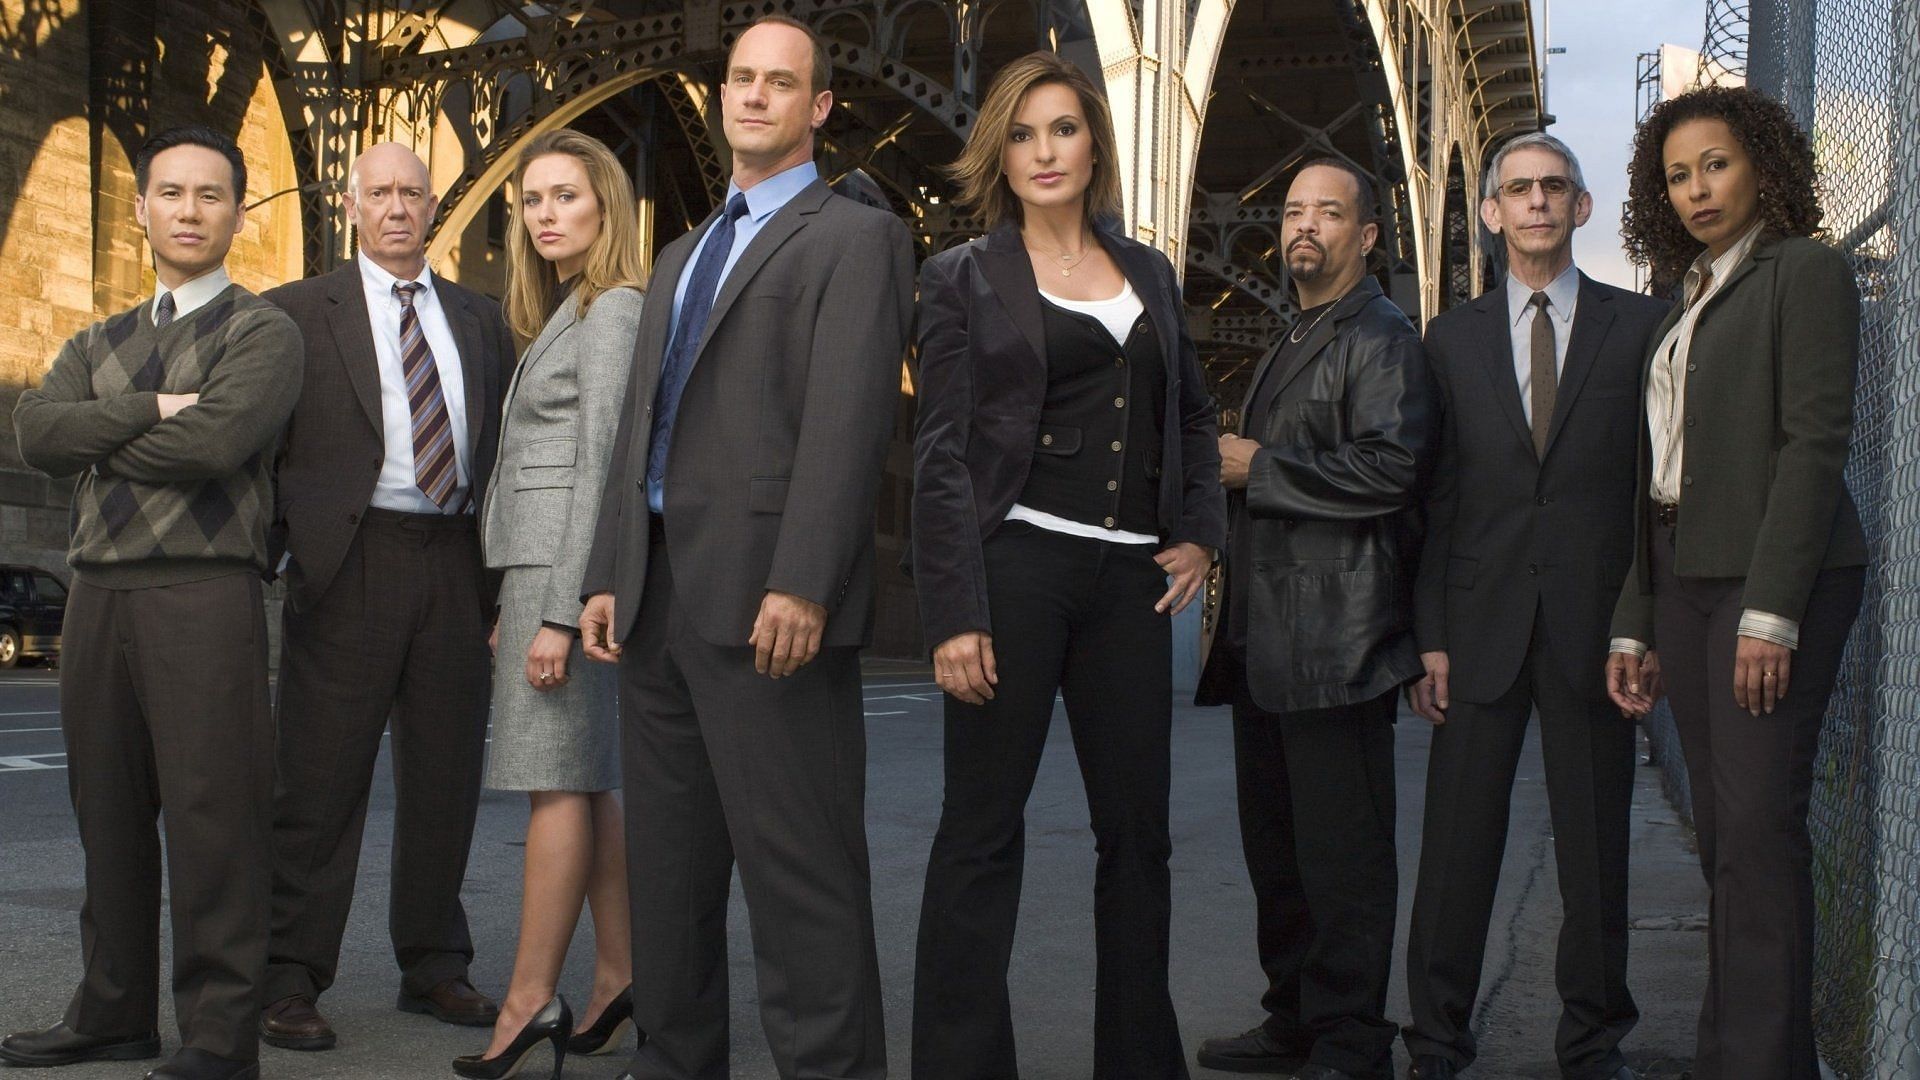 Law and Order Season 21 cast list Sam Waterson, Anthony Anderson, and